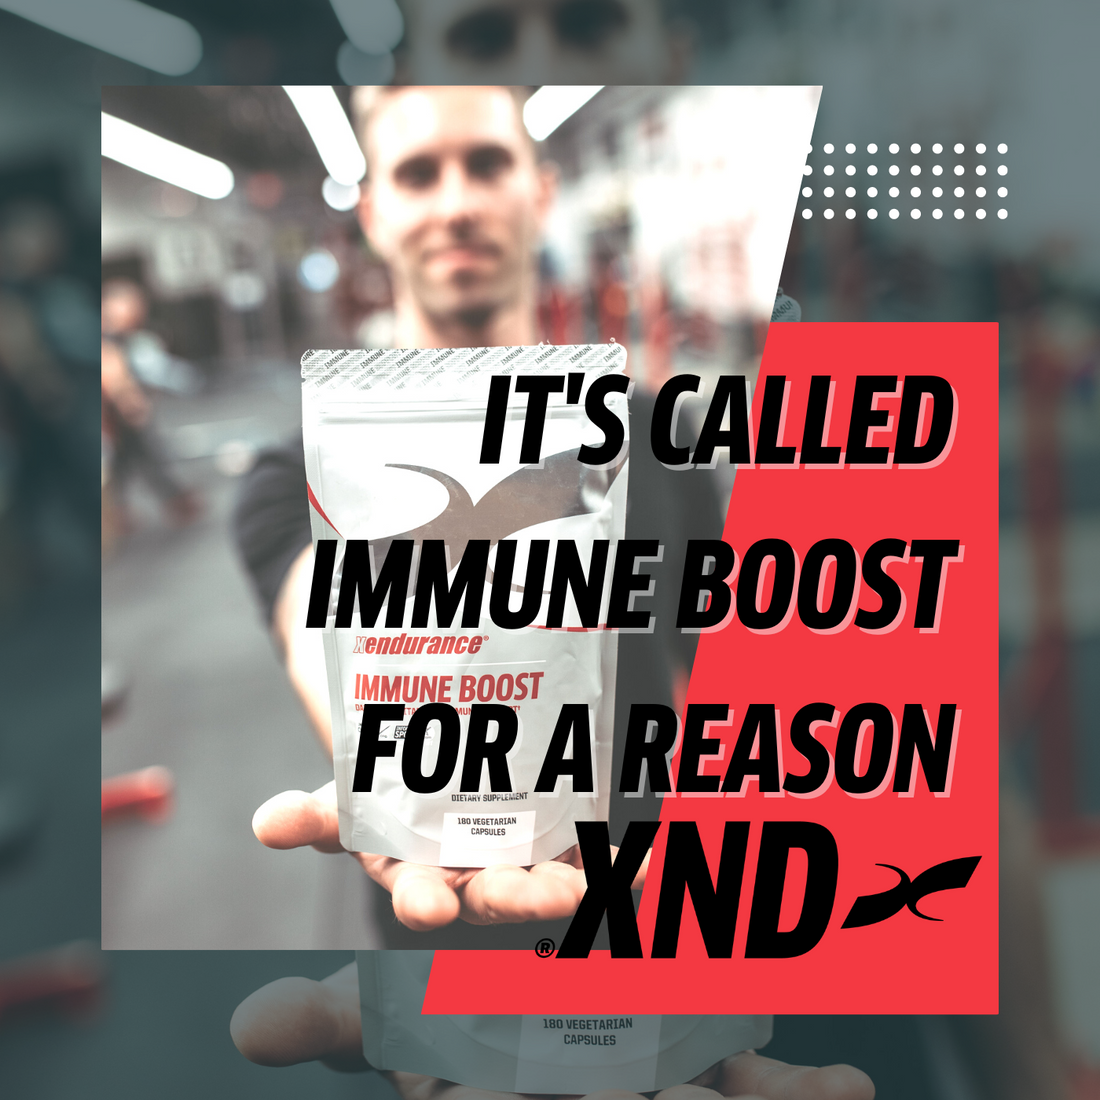 It’s called Immune Boost for a reason